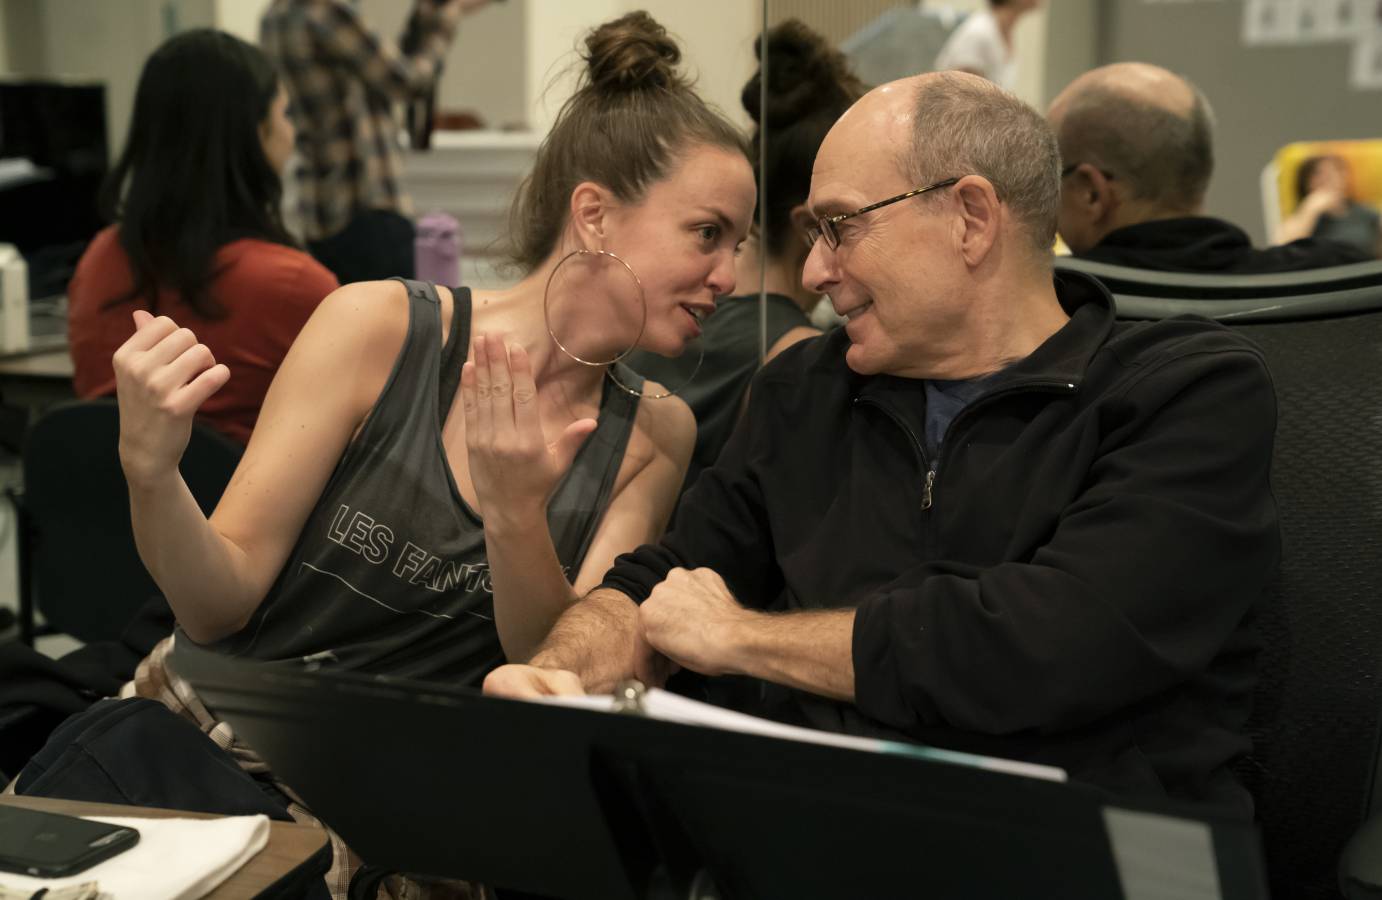 Michelle Dorrance chats with James Lapine during rehearsal. Both wear animated expressions